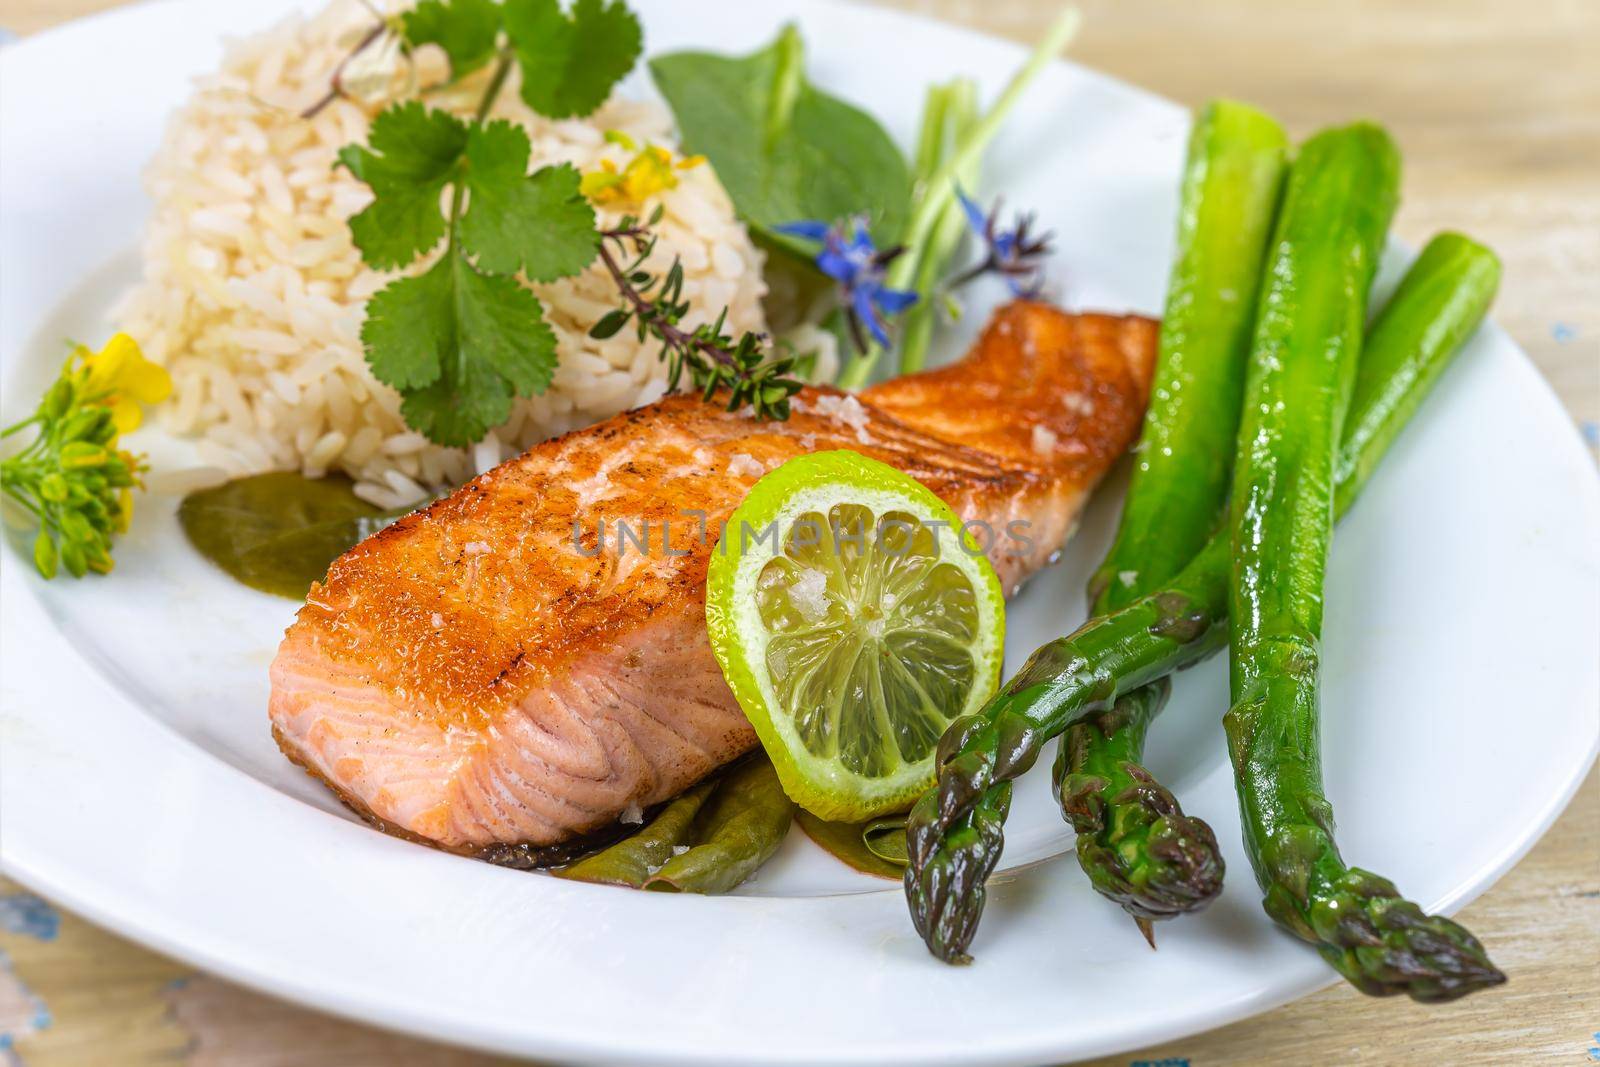 Plate of salmon, asparagus and rice on standby wooden board by JPC-PROD